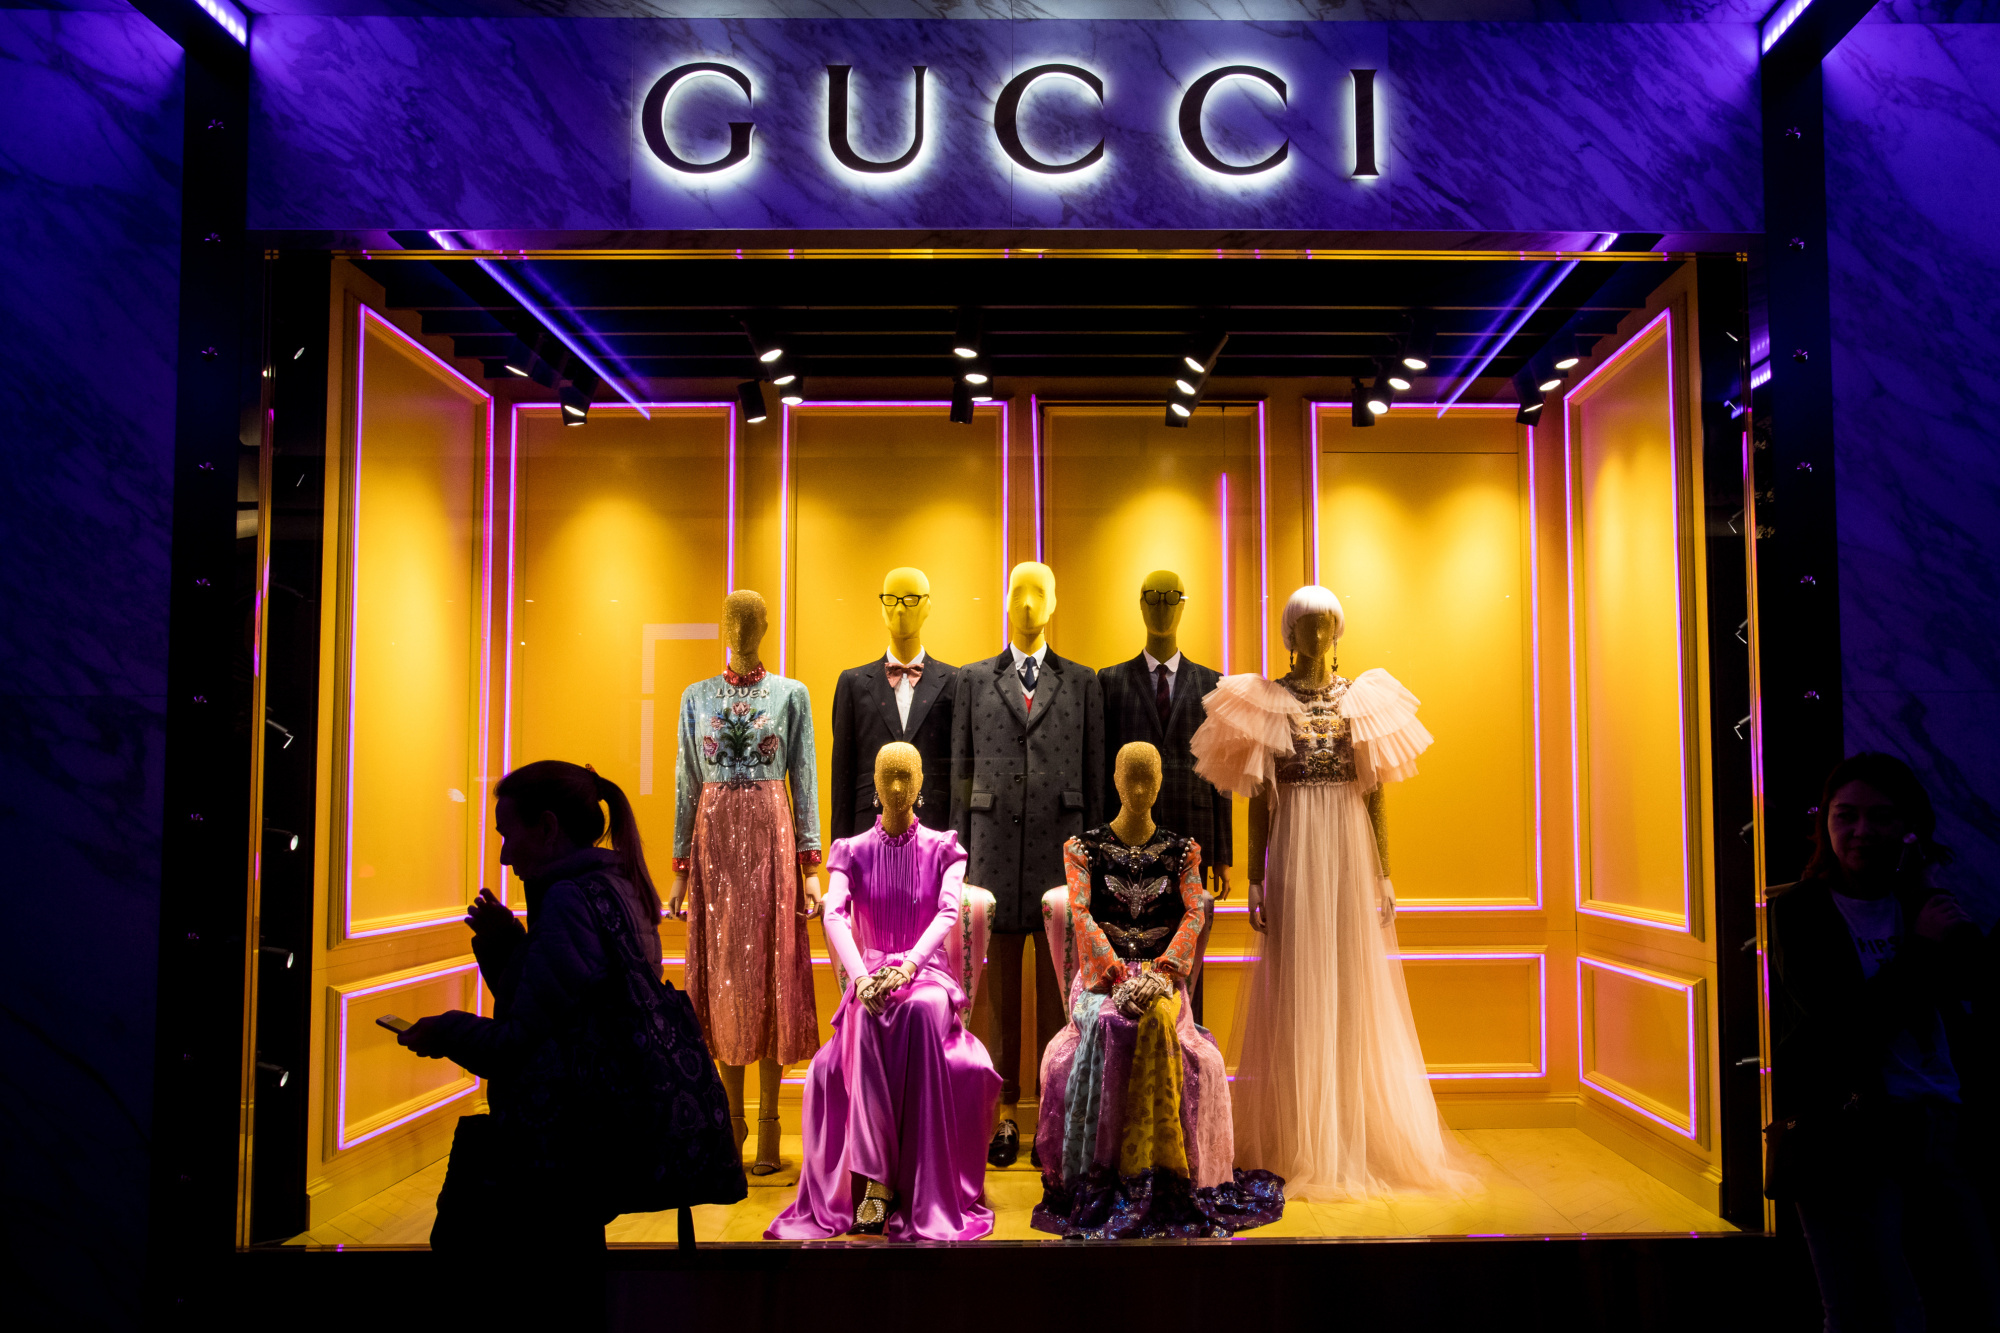 Gucci Makes a Big London Move, Swapping Old Bond for New Bond